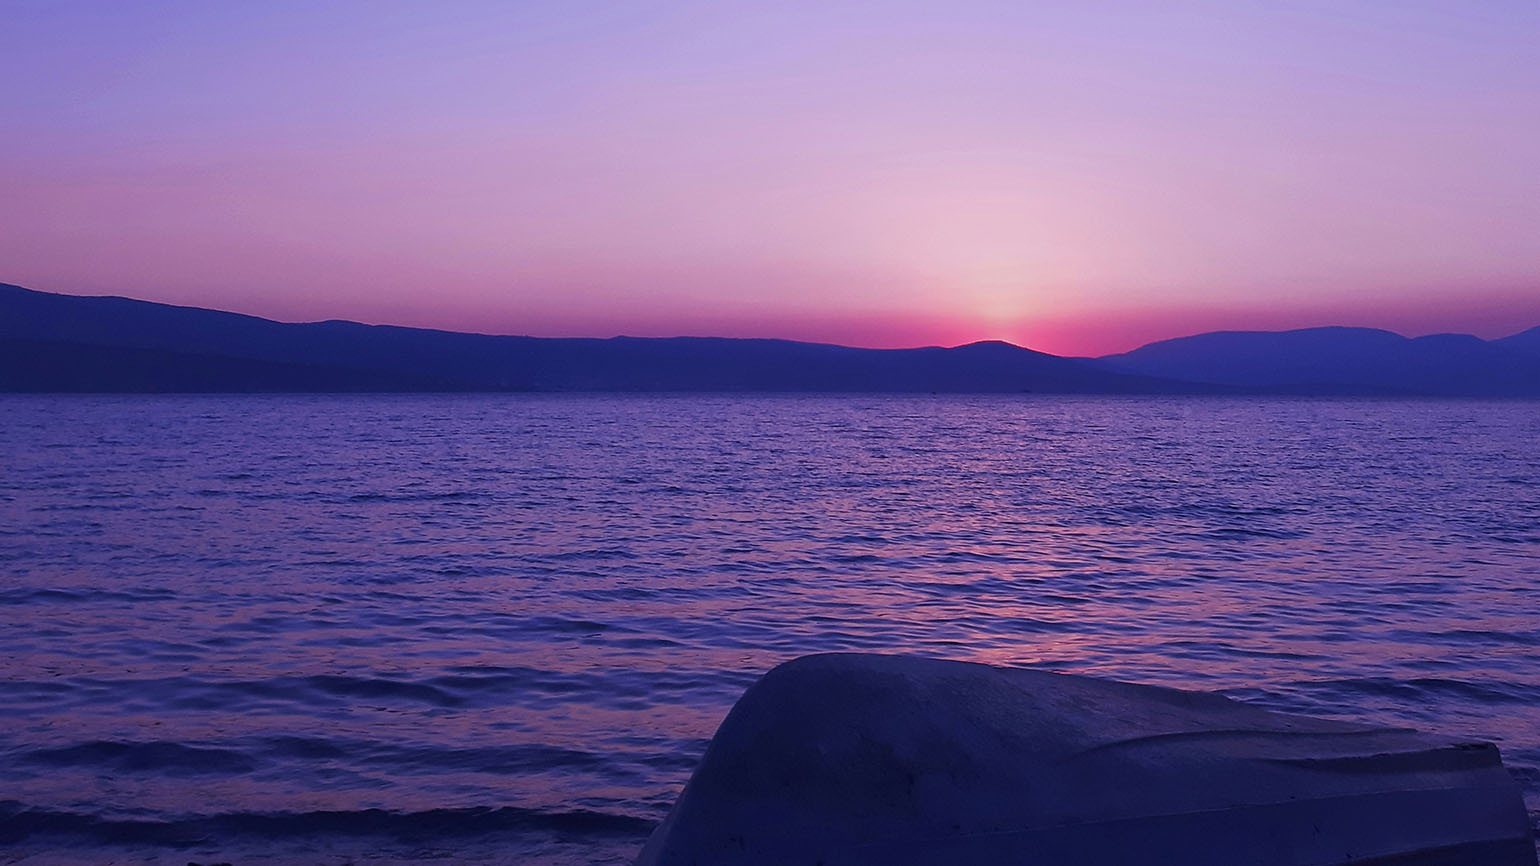 A brilliant purple sunset over the ocean demonstrates the power of unity.